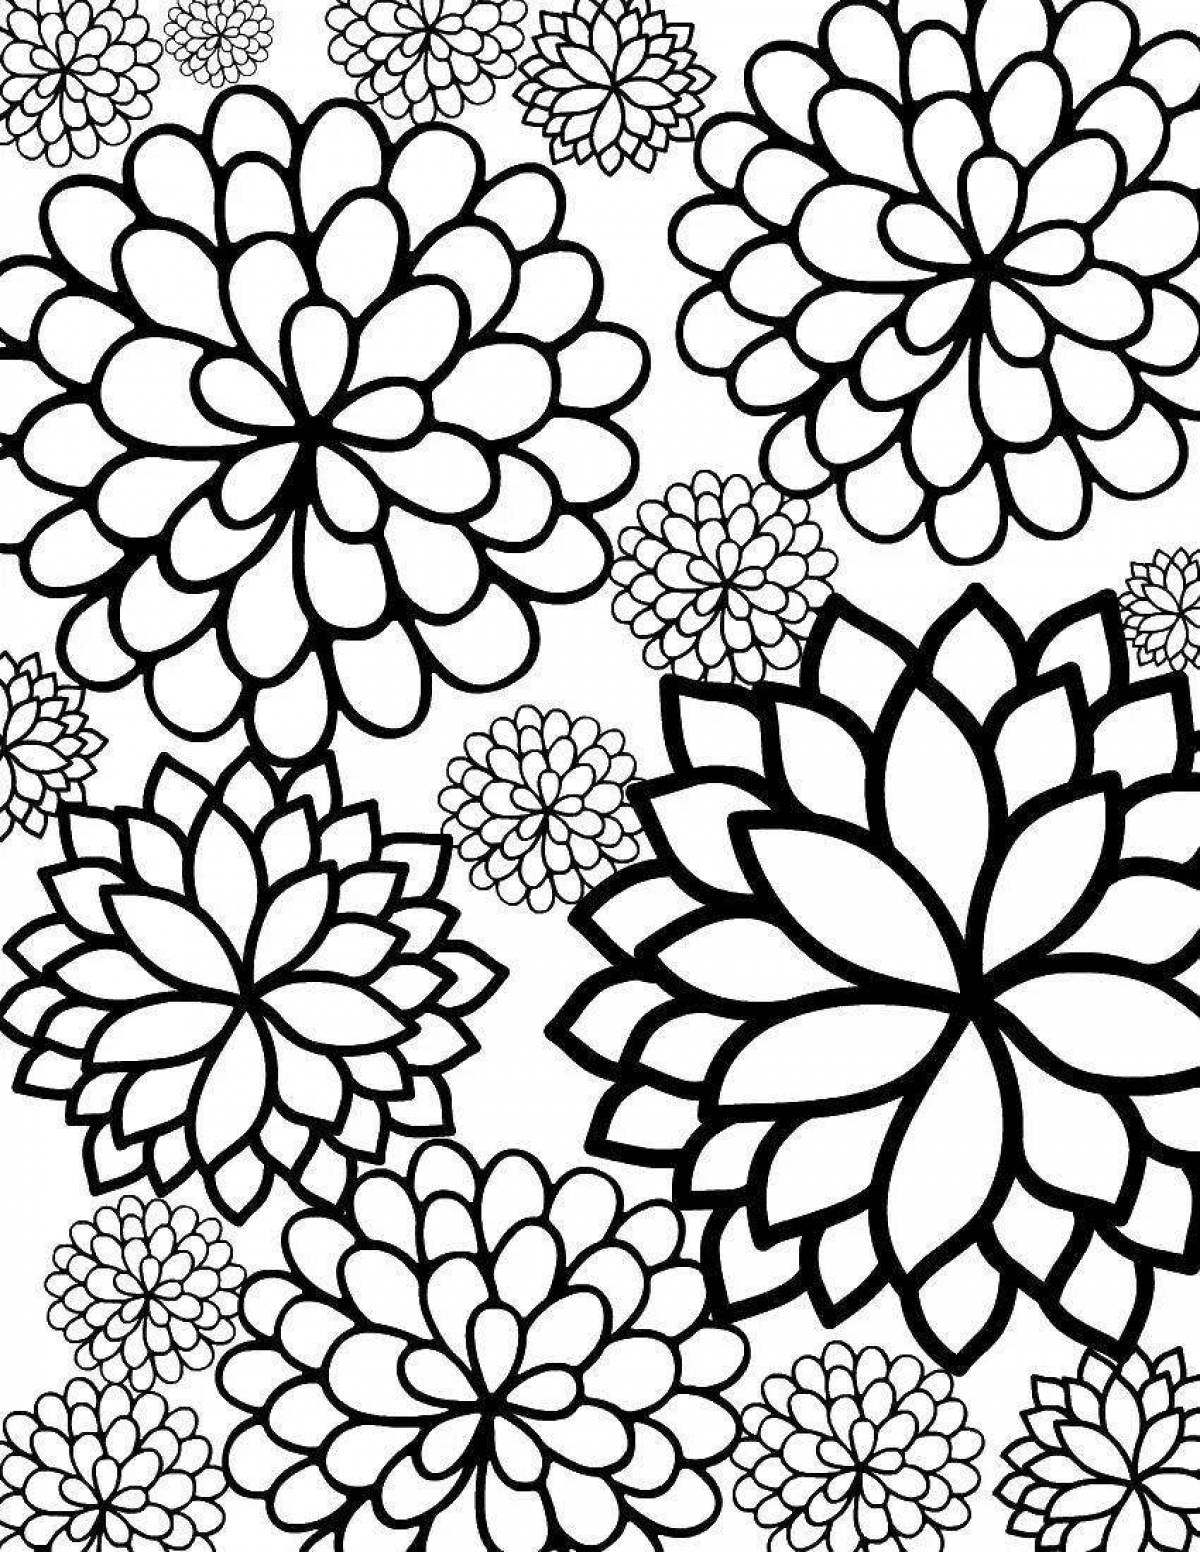 Gorgeous light pattern coloring book